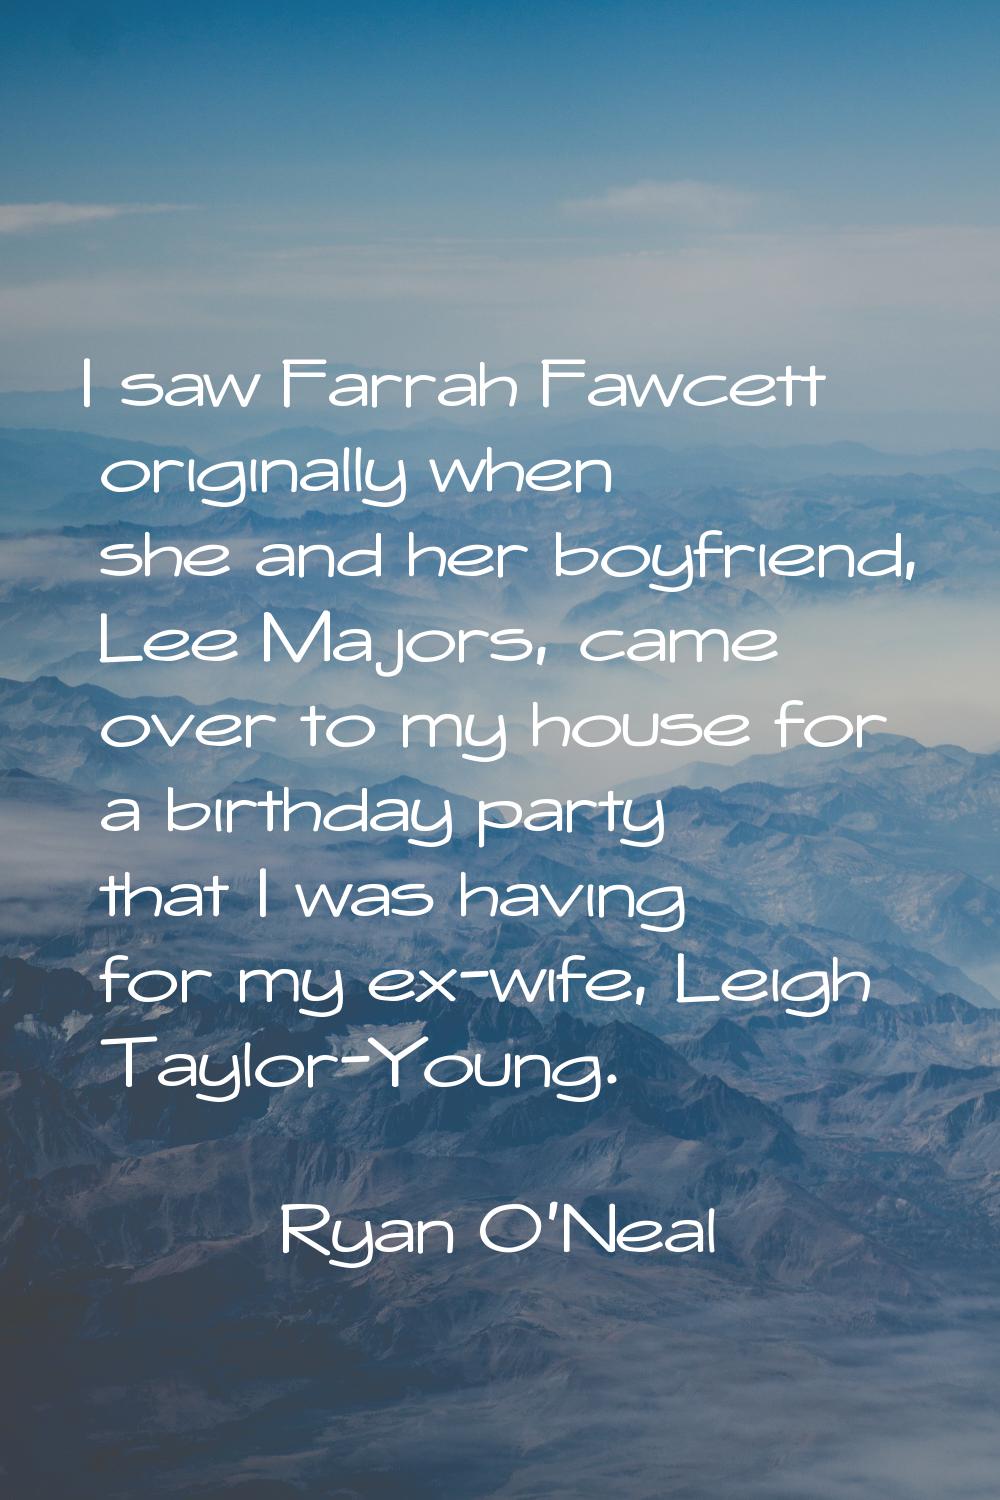 I saw Farrah Fawcett originally when she and her boyfriend, Lee Majors, came over to my house for a